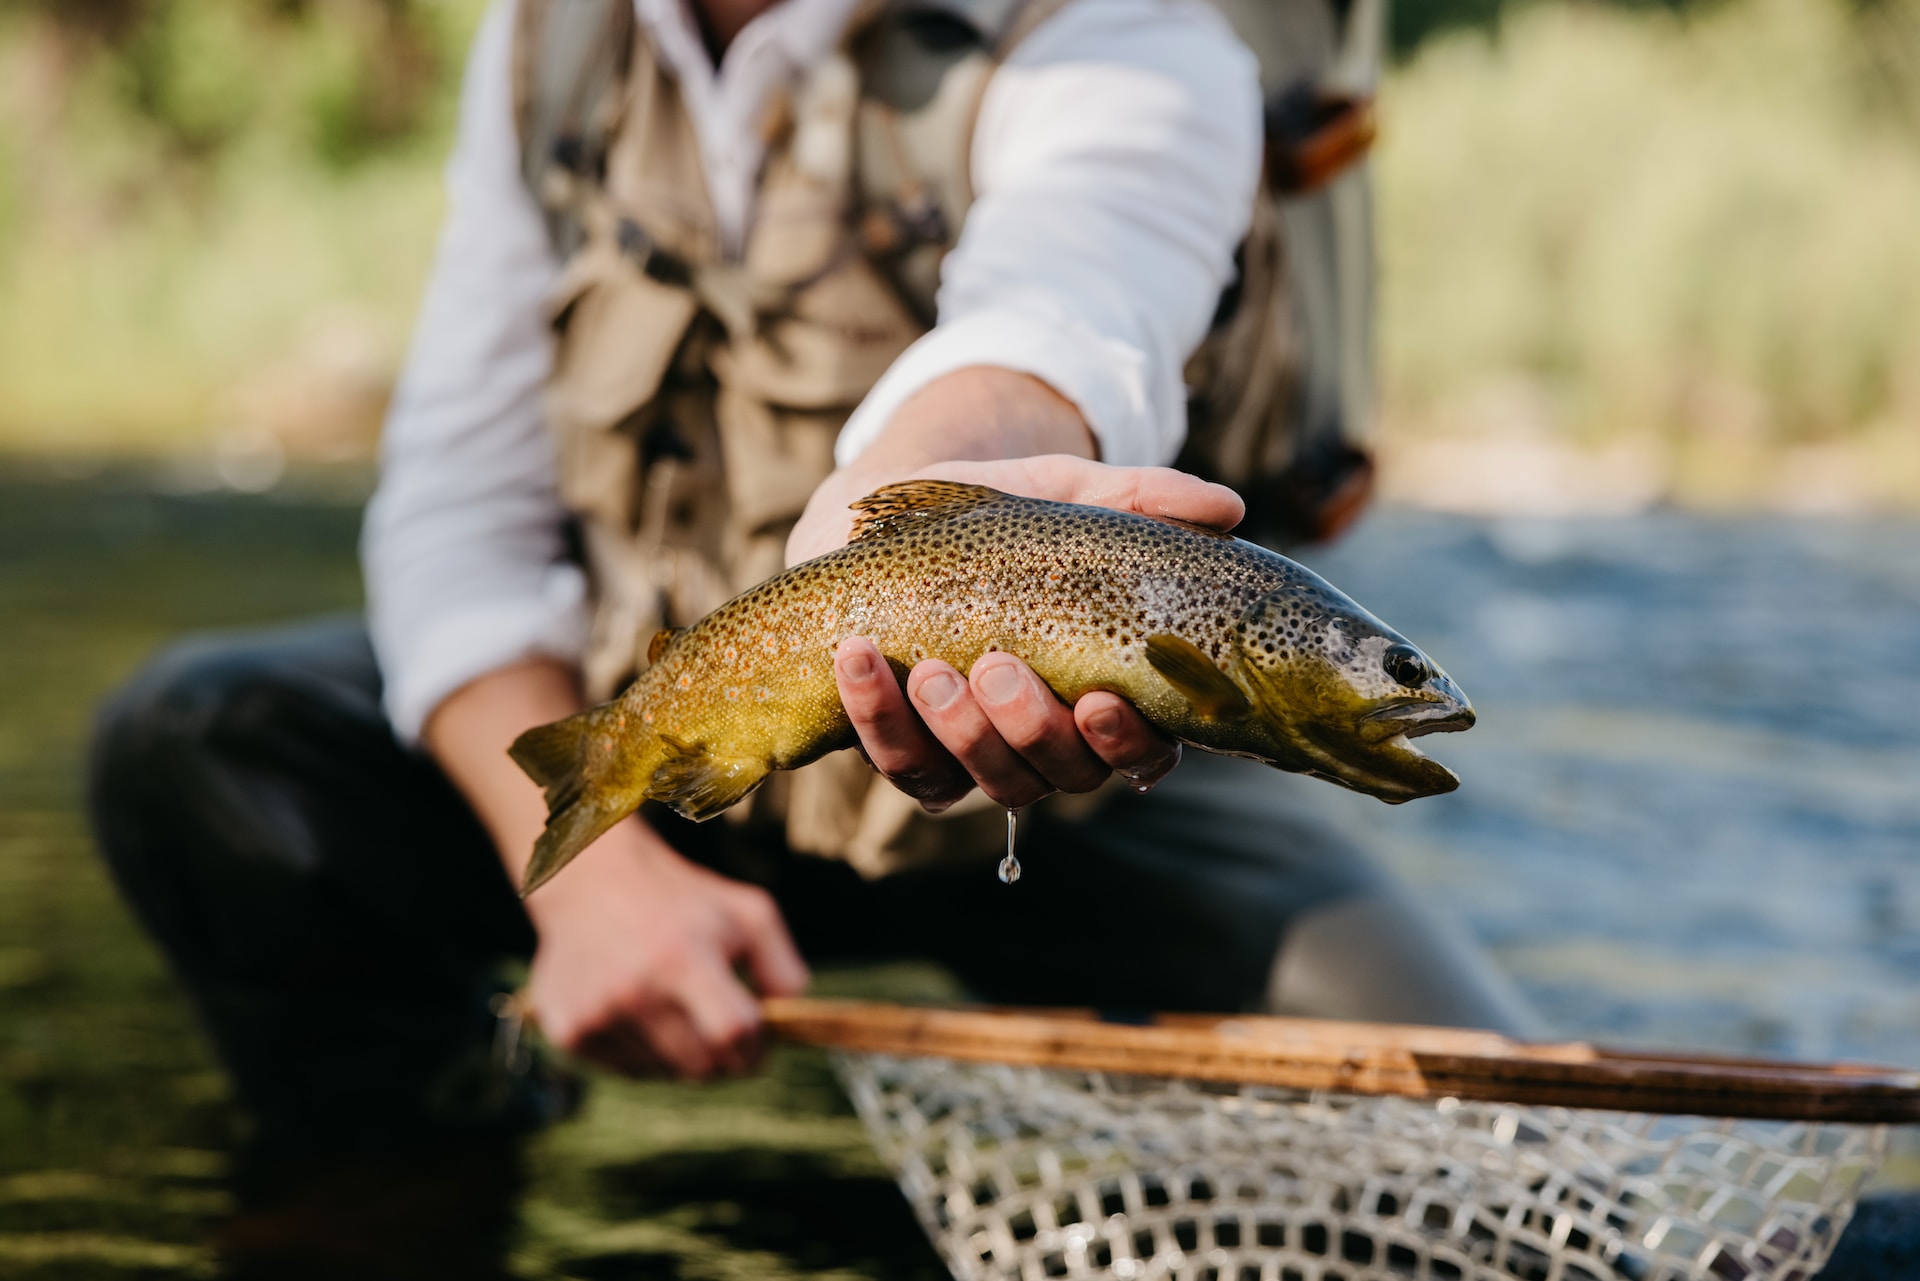 Yellowstone river mountain whitefish should not be eaten, but rainbow trout  are fine, authorities say: Here's why - The Manual